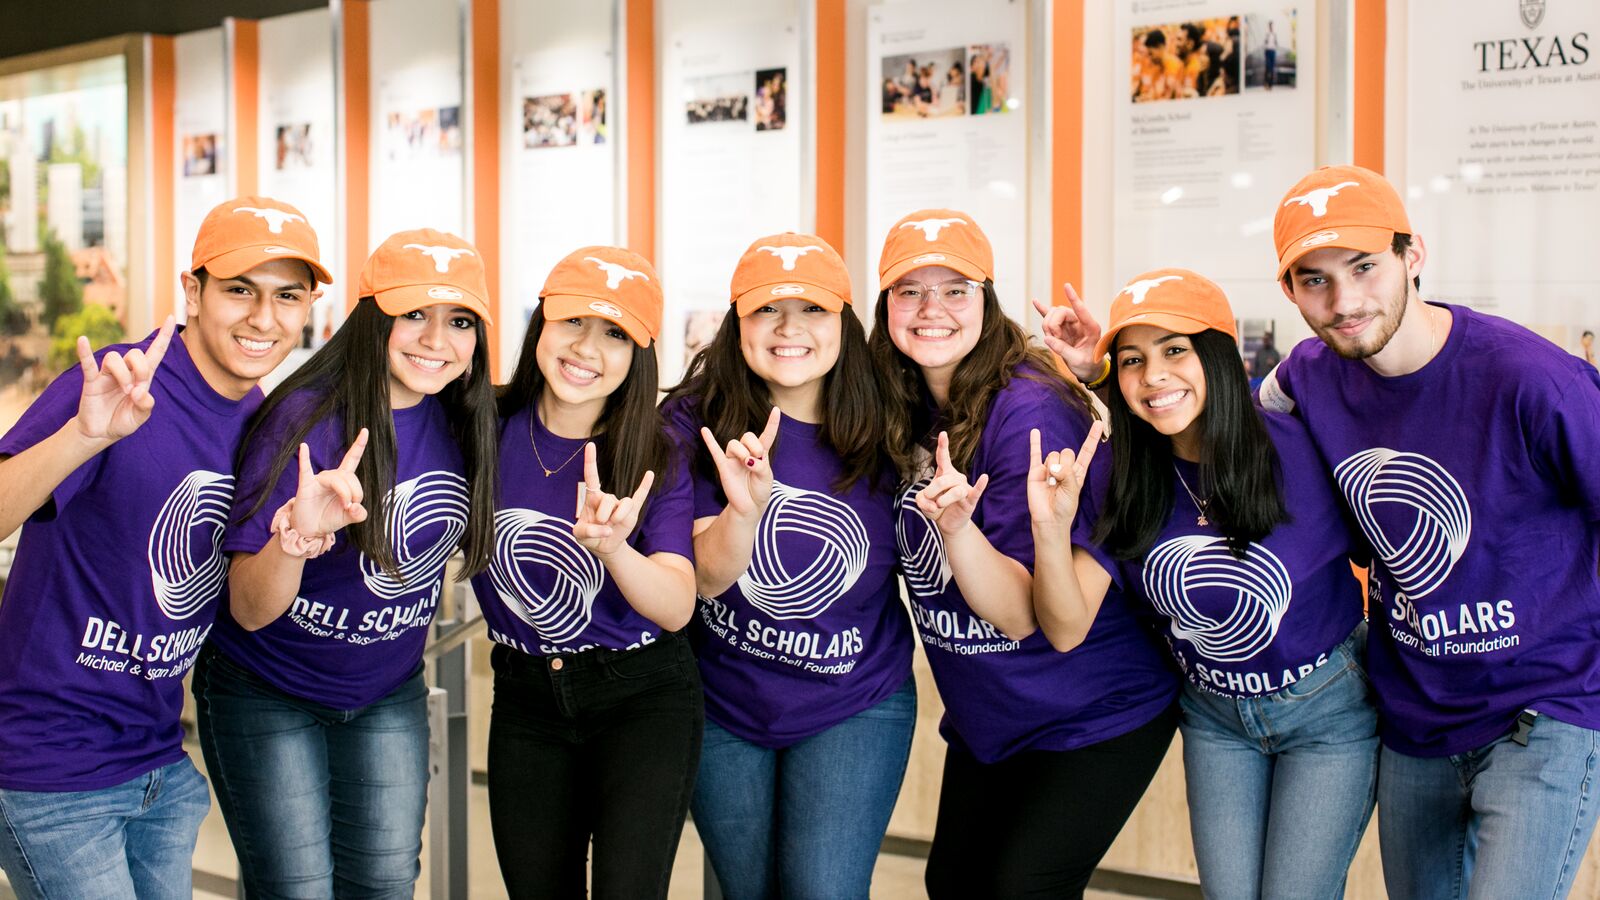 Dell Scholars at UT stand together wearing Longhorn caps.